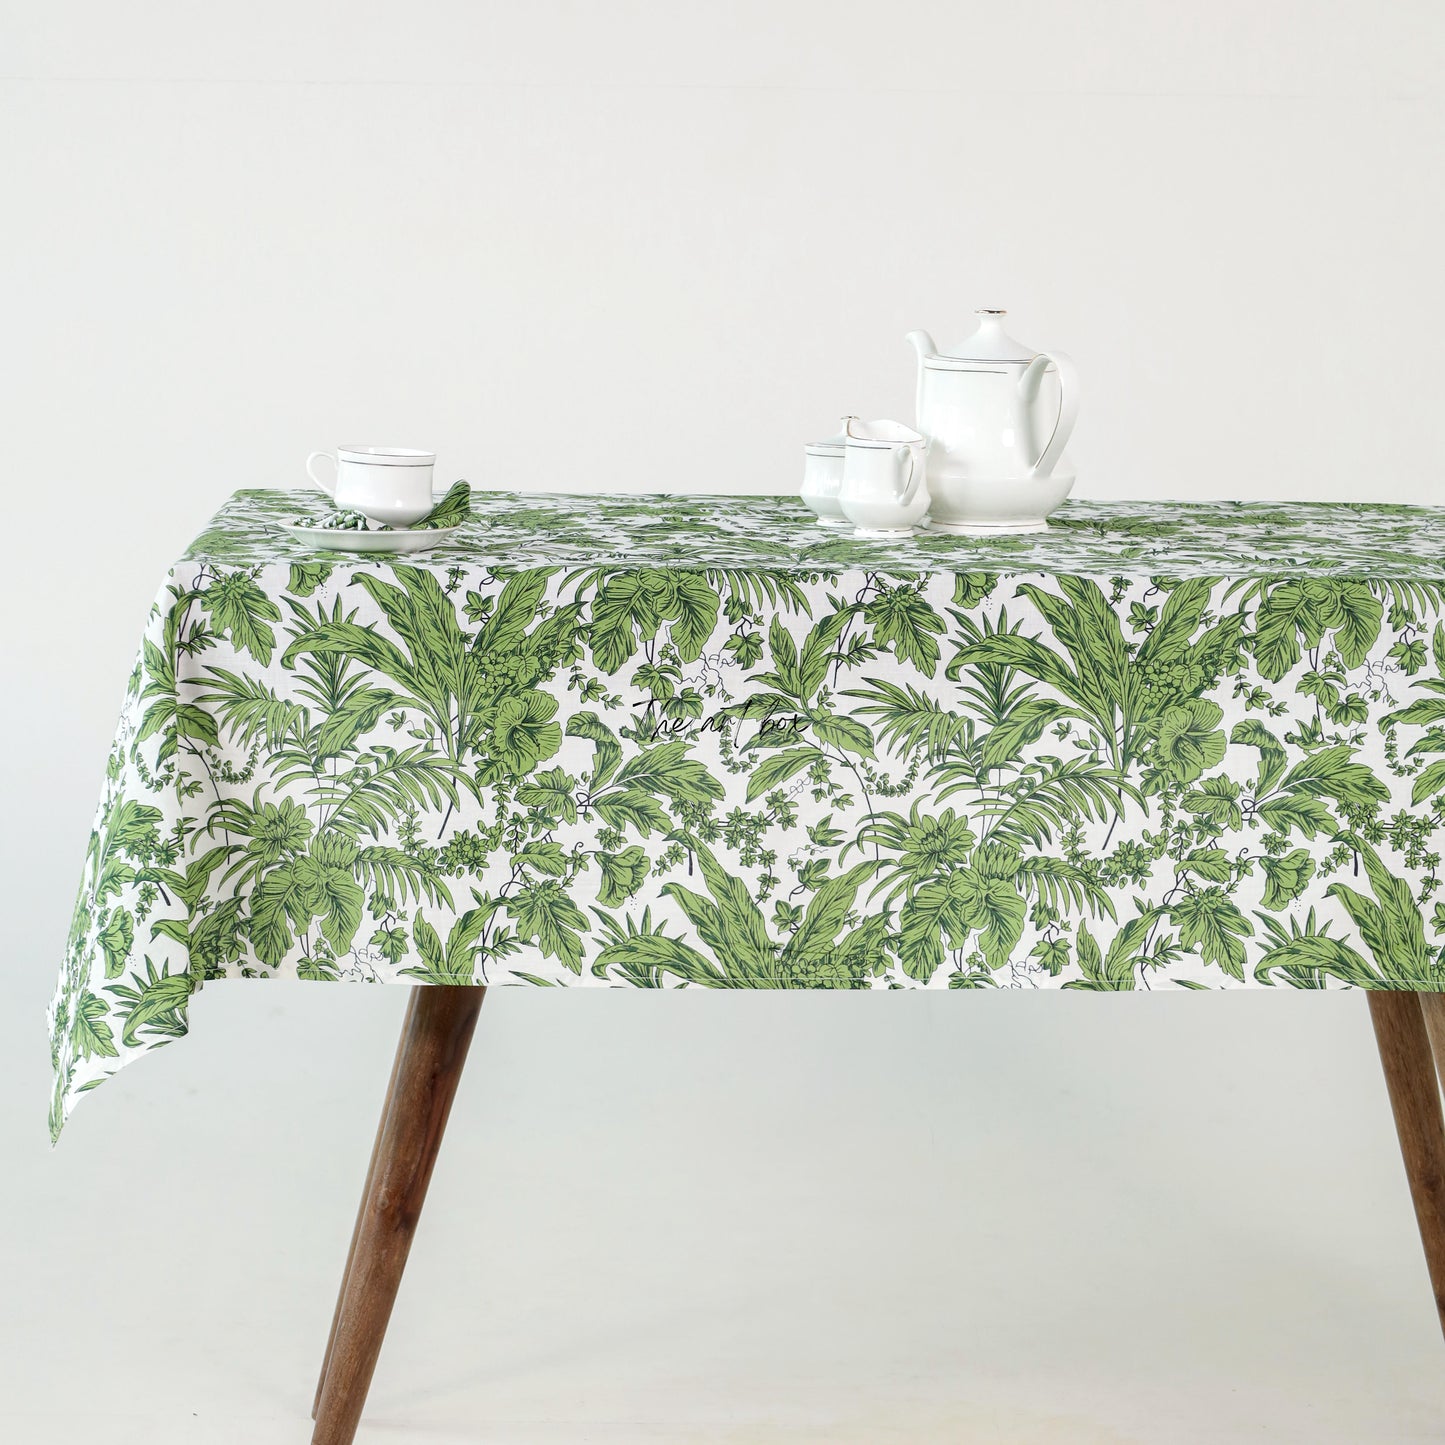 Serenity Blooms Printed Table cover in Soft Floral Cotton